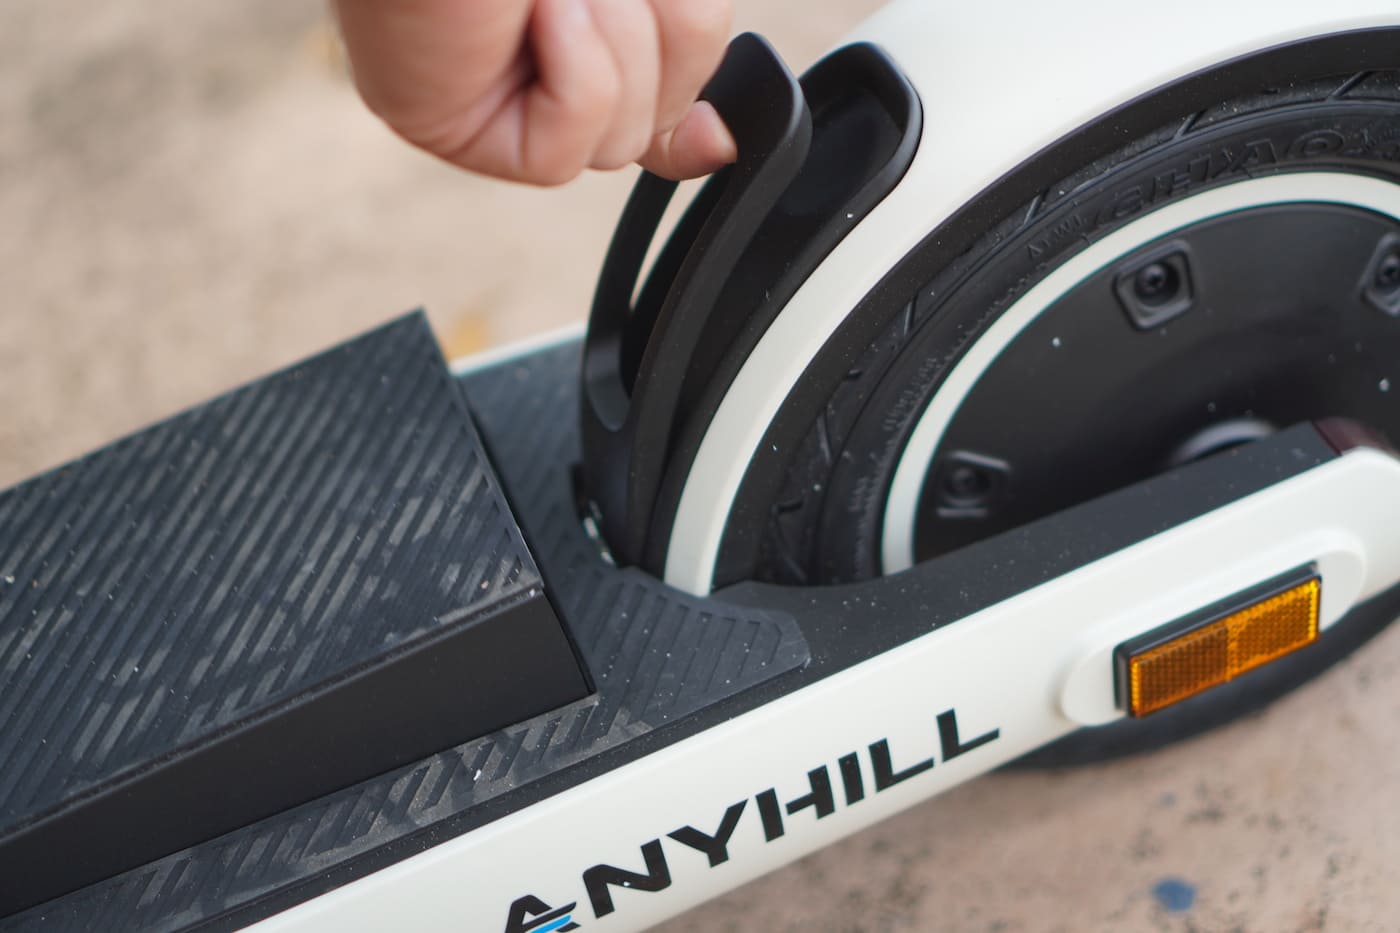 anyhill um-2 electric scooter